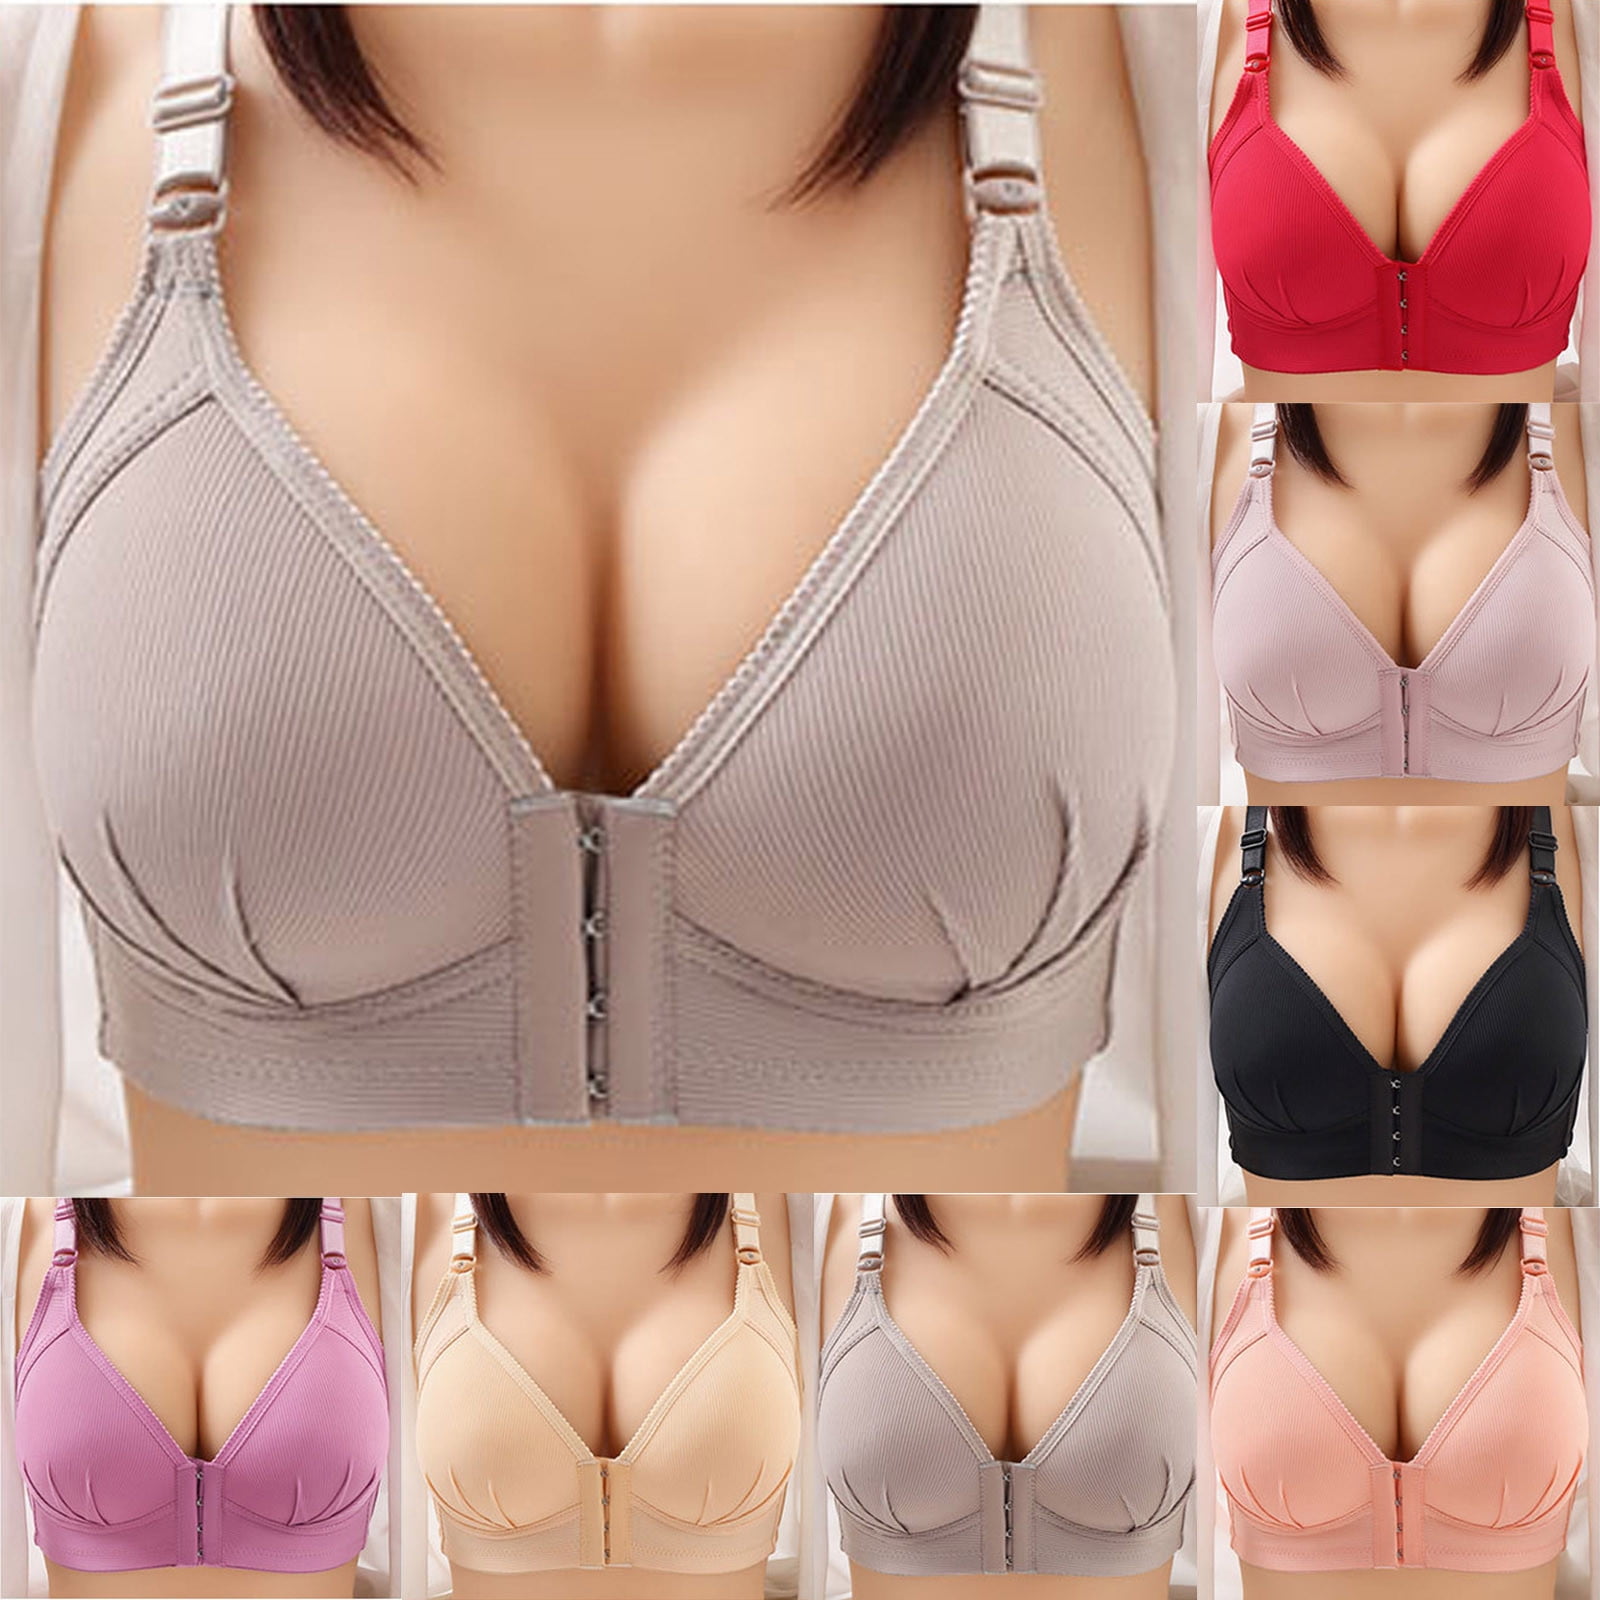 Ozmmyan Wirefree Bras for Women ,Plus Size Front Closure Lace Bra  Wirefreee Extra-Elastic Bra Adjustable Shoulder Straps Sports Bras 36C-46C,  Summer Savings Clearance 